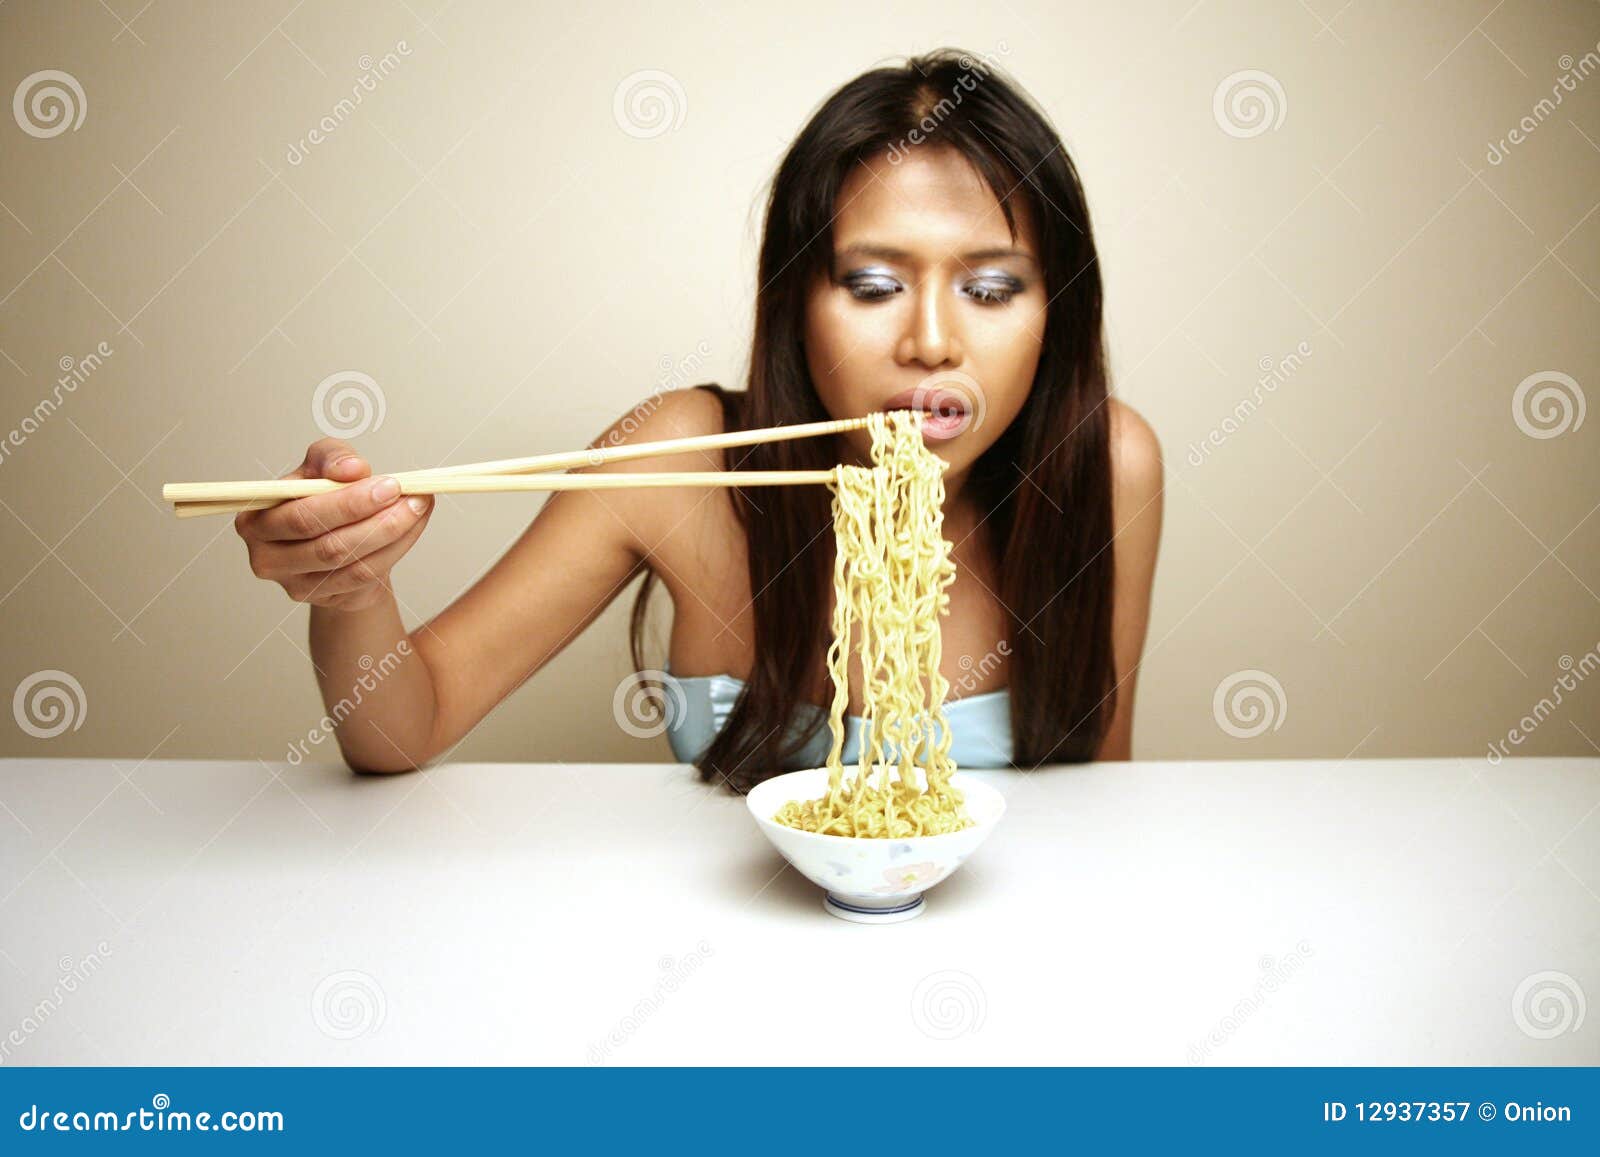 Cute Asian Woman Eating Noodles Stock Image Image Of Asia Dish 12937357 